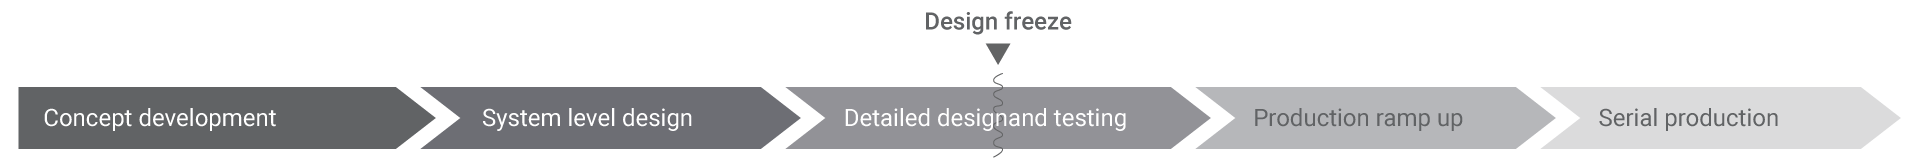 chart over product development and design